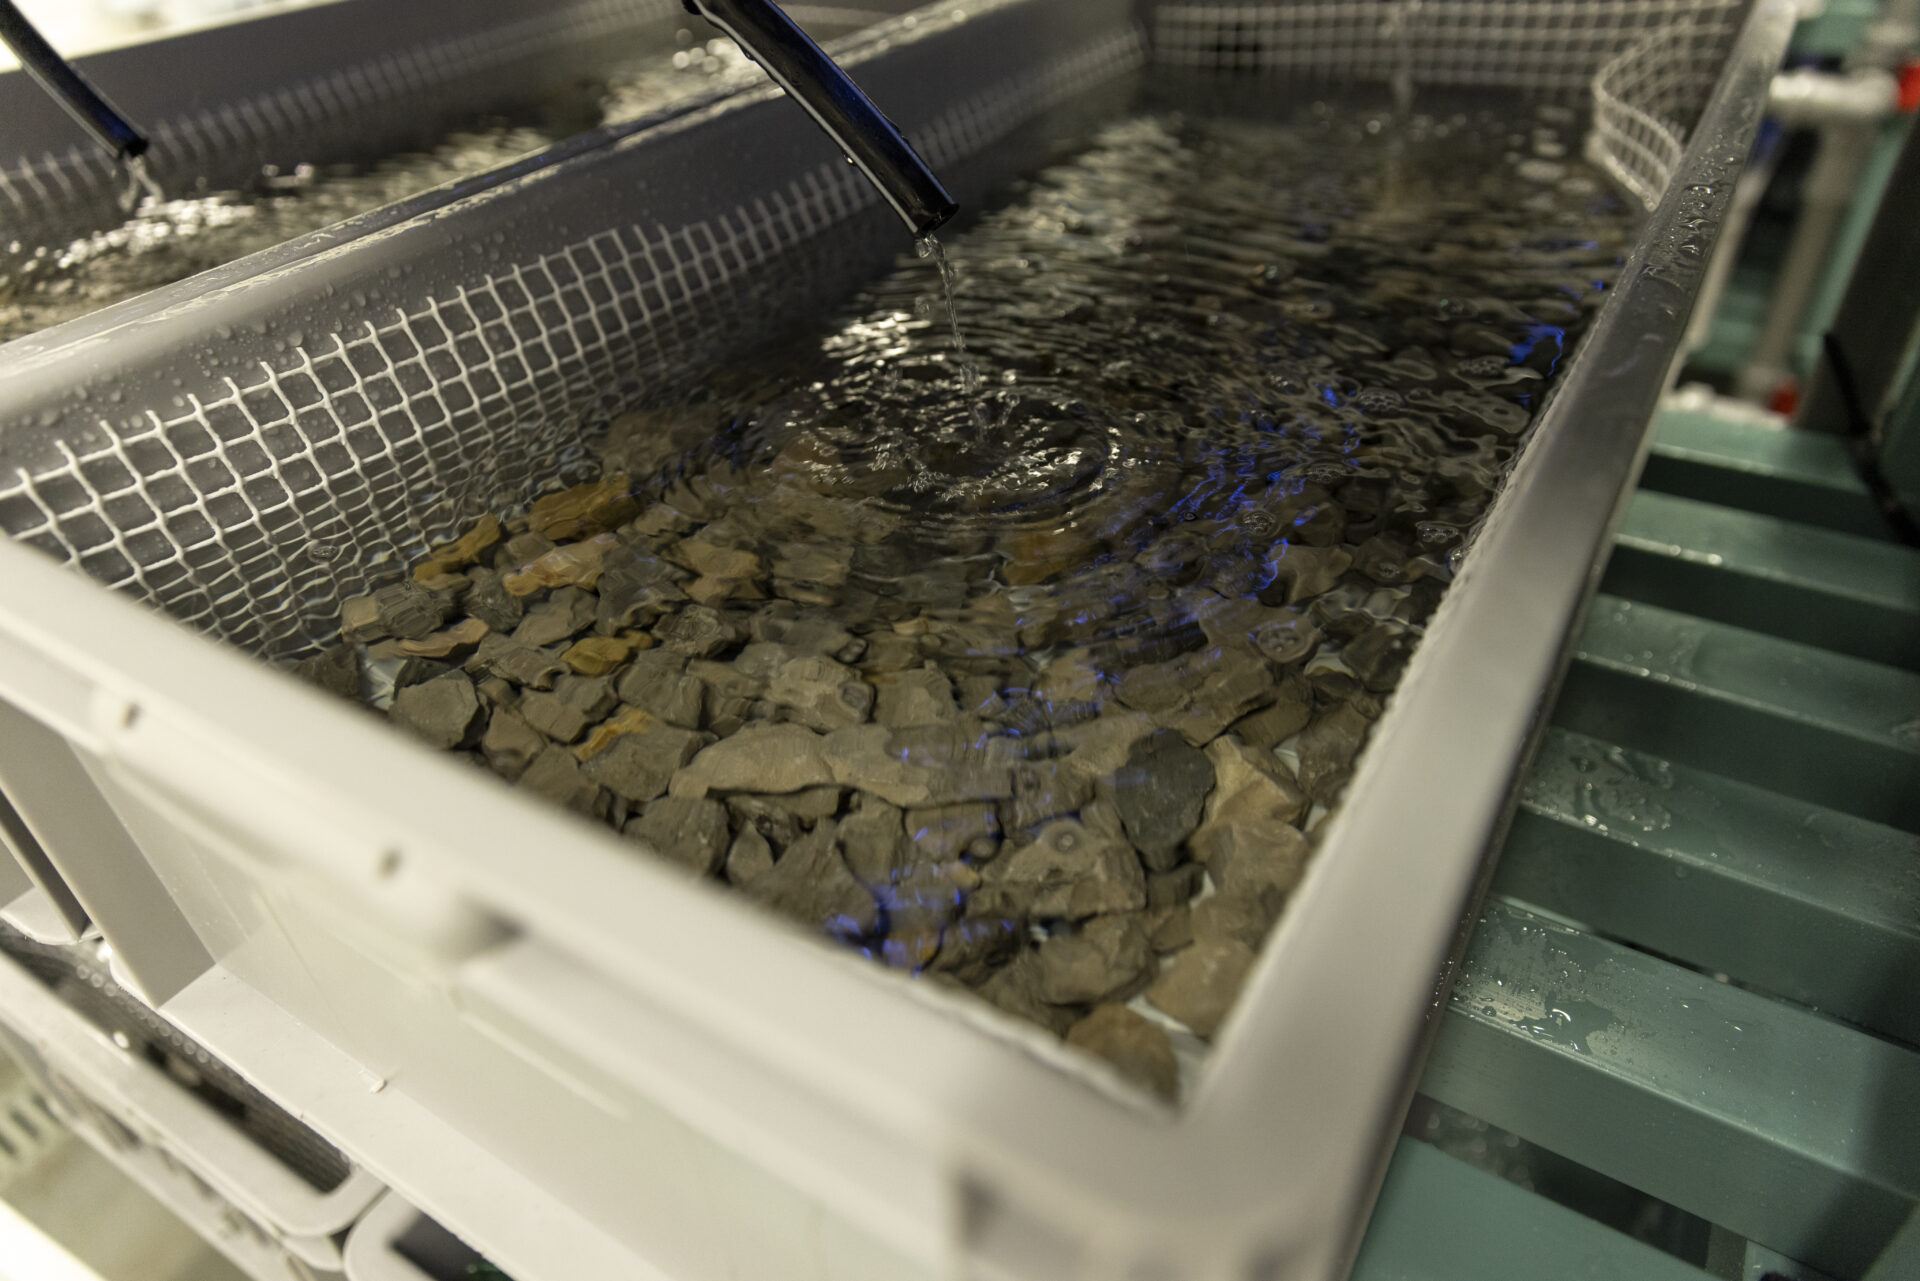 Gravel is prepared in a cultivation tray at the the Marine and Environmental Sciences Centre in Peniche, Portugal. (Photo courtesy Jan Verbeek)